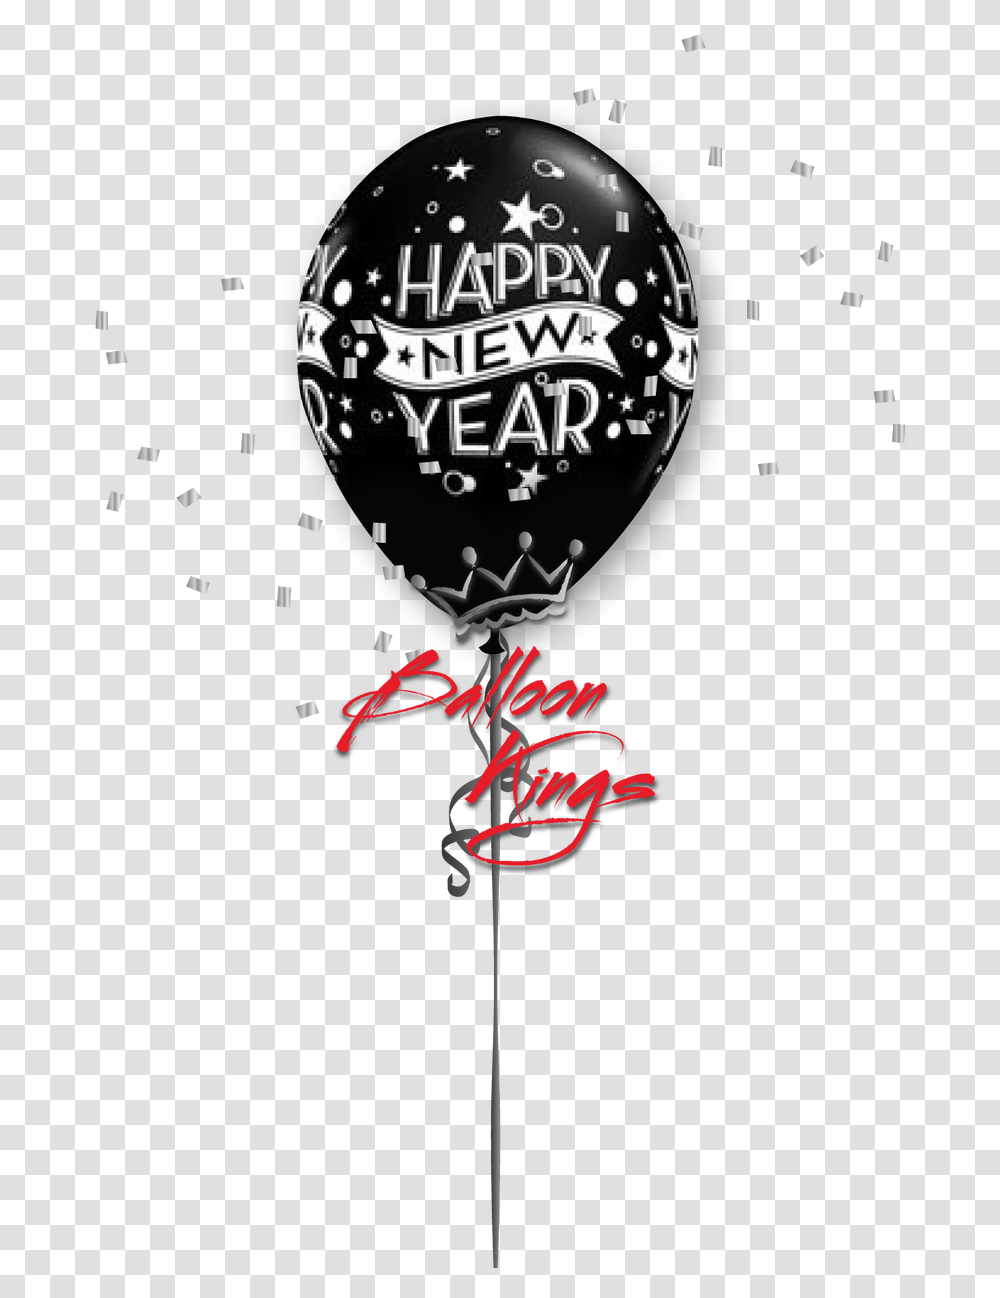 Latex New Year Confetti Full Hd Background Images For Picsart, Glass, Armor, Mandolin Transparent Png